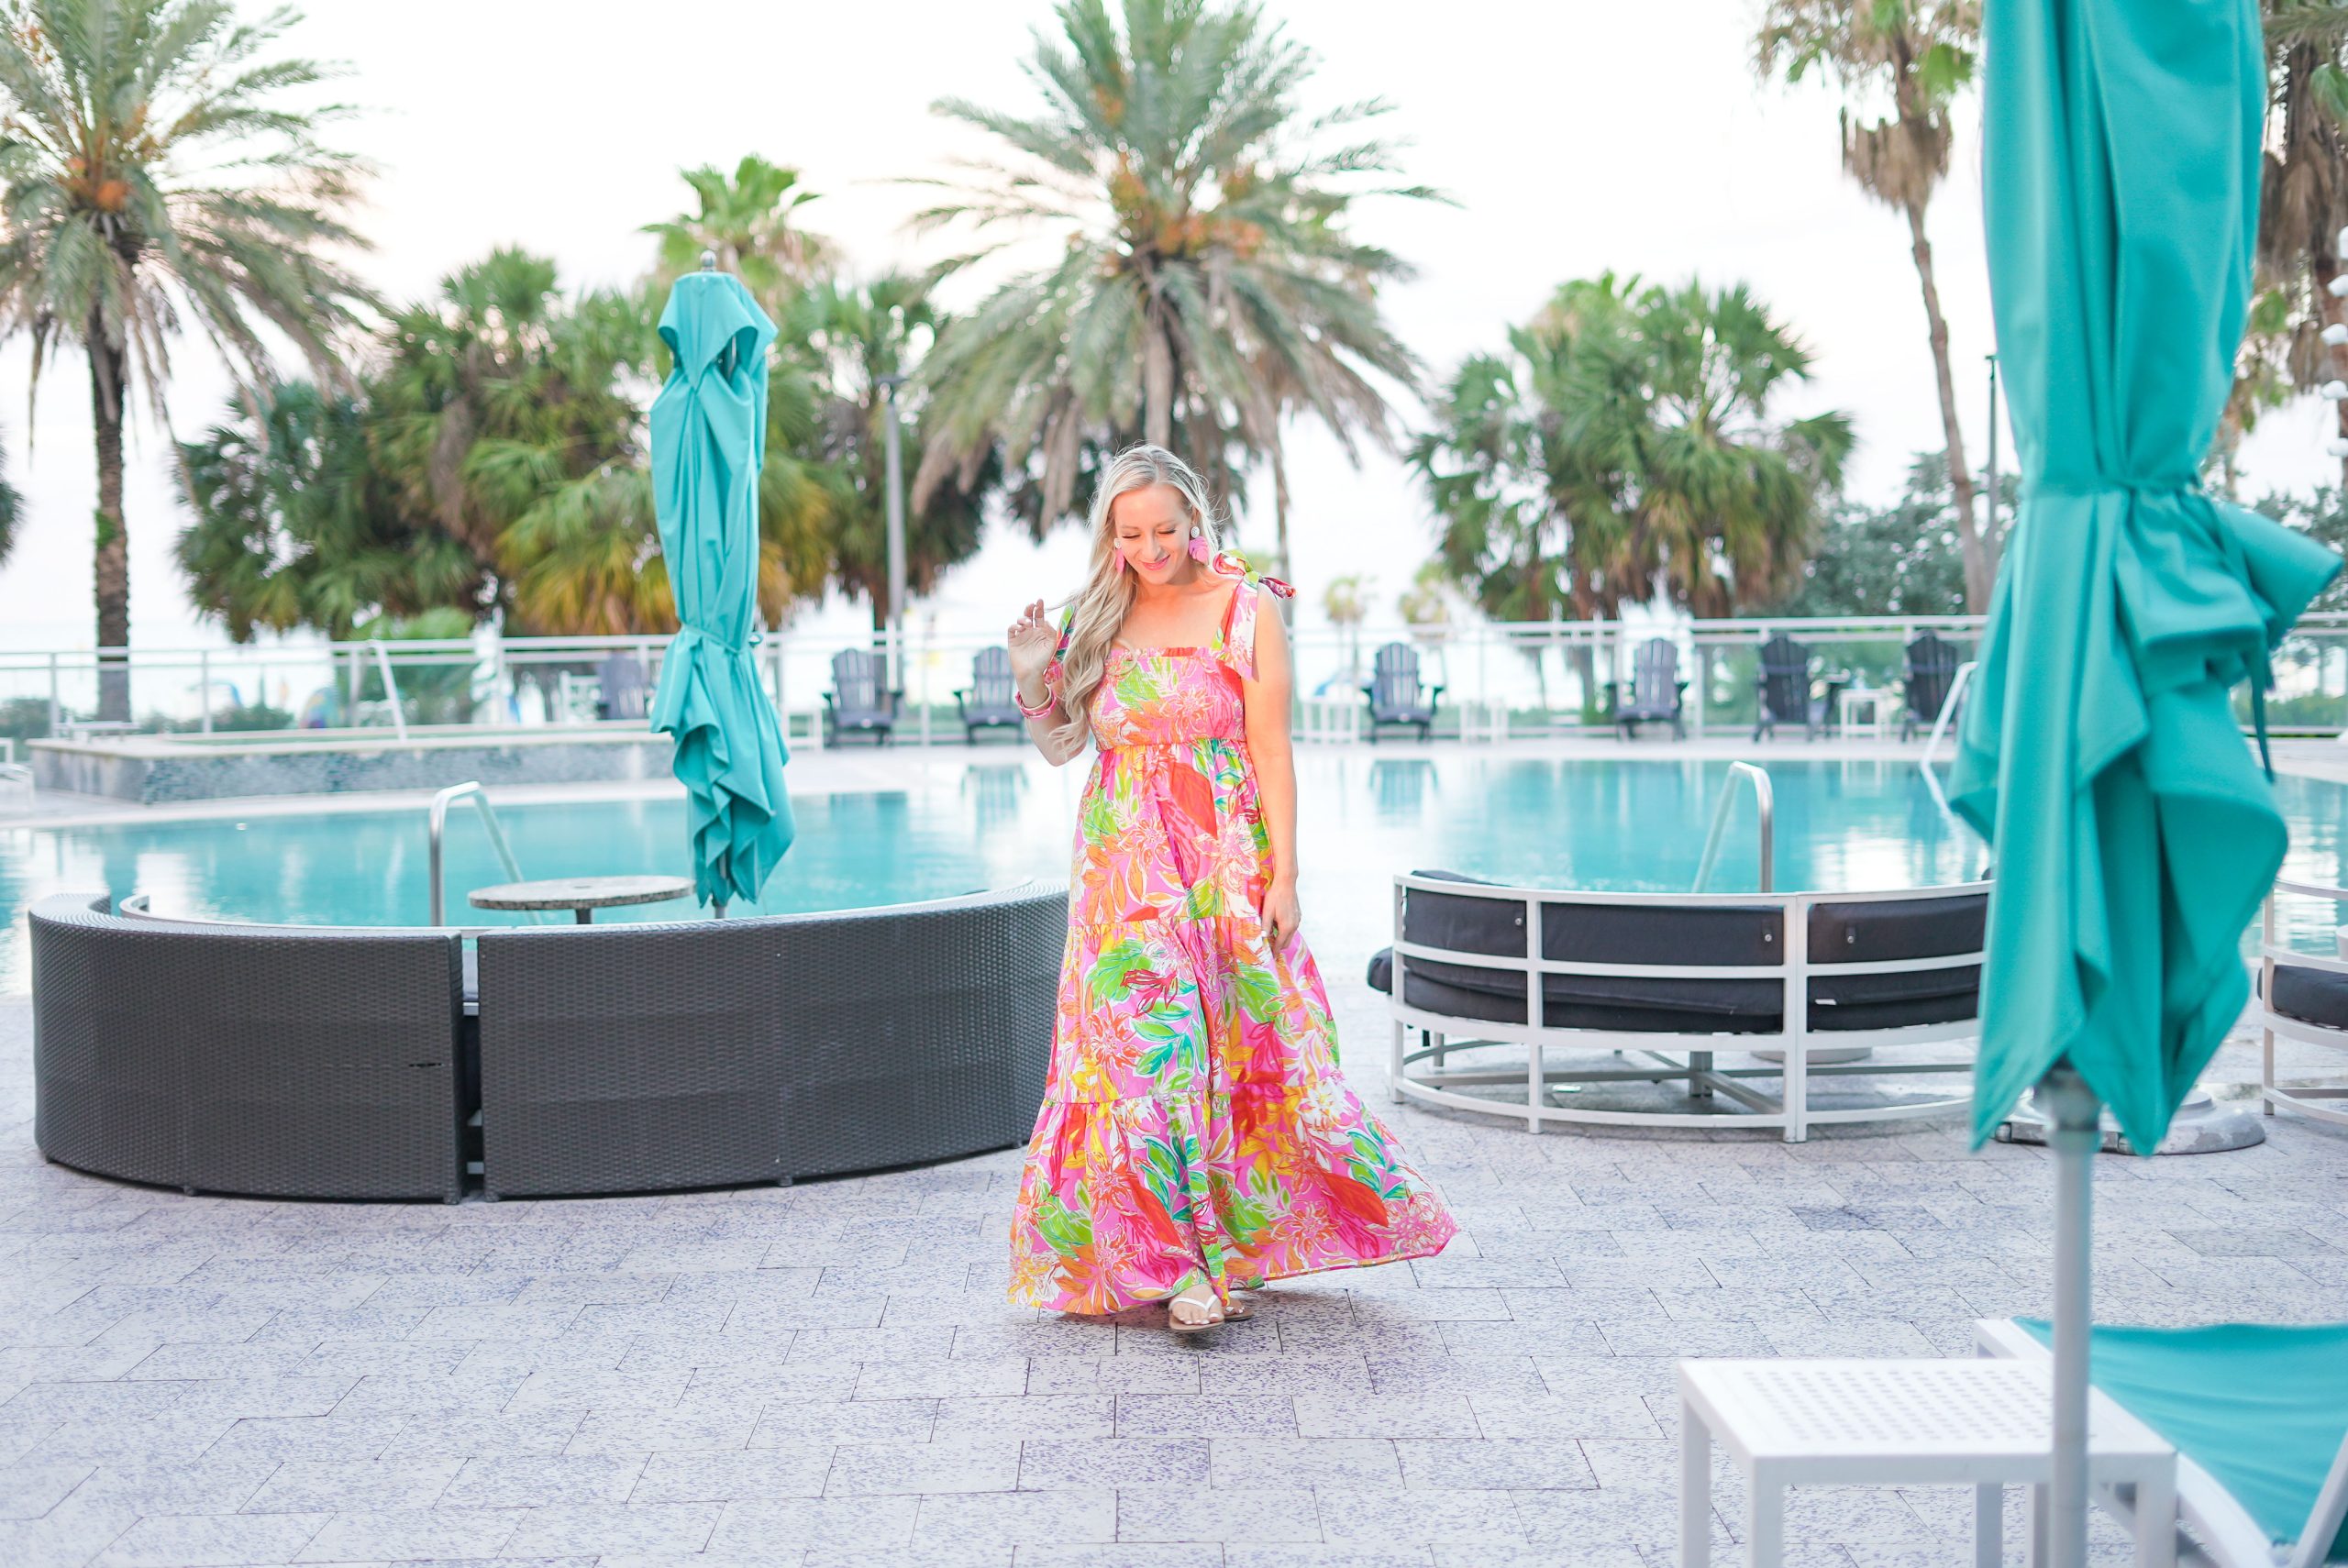 Florida Blogger, The lovely Flamingo, Jill DiGioia wears a colorful maxi dress in front of the pool at the Wyndham Grand Clearwater Beach.